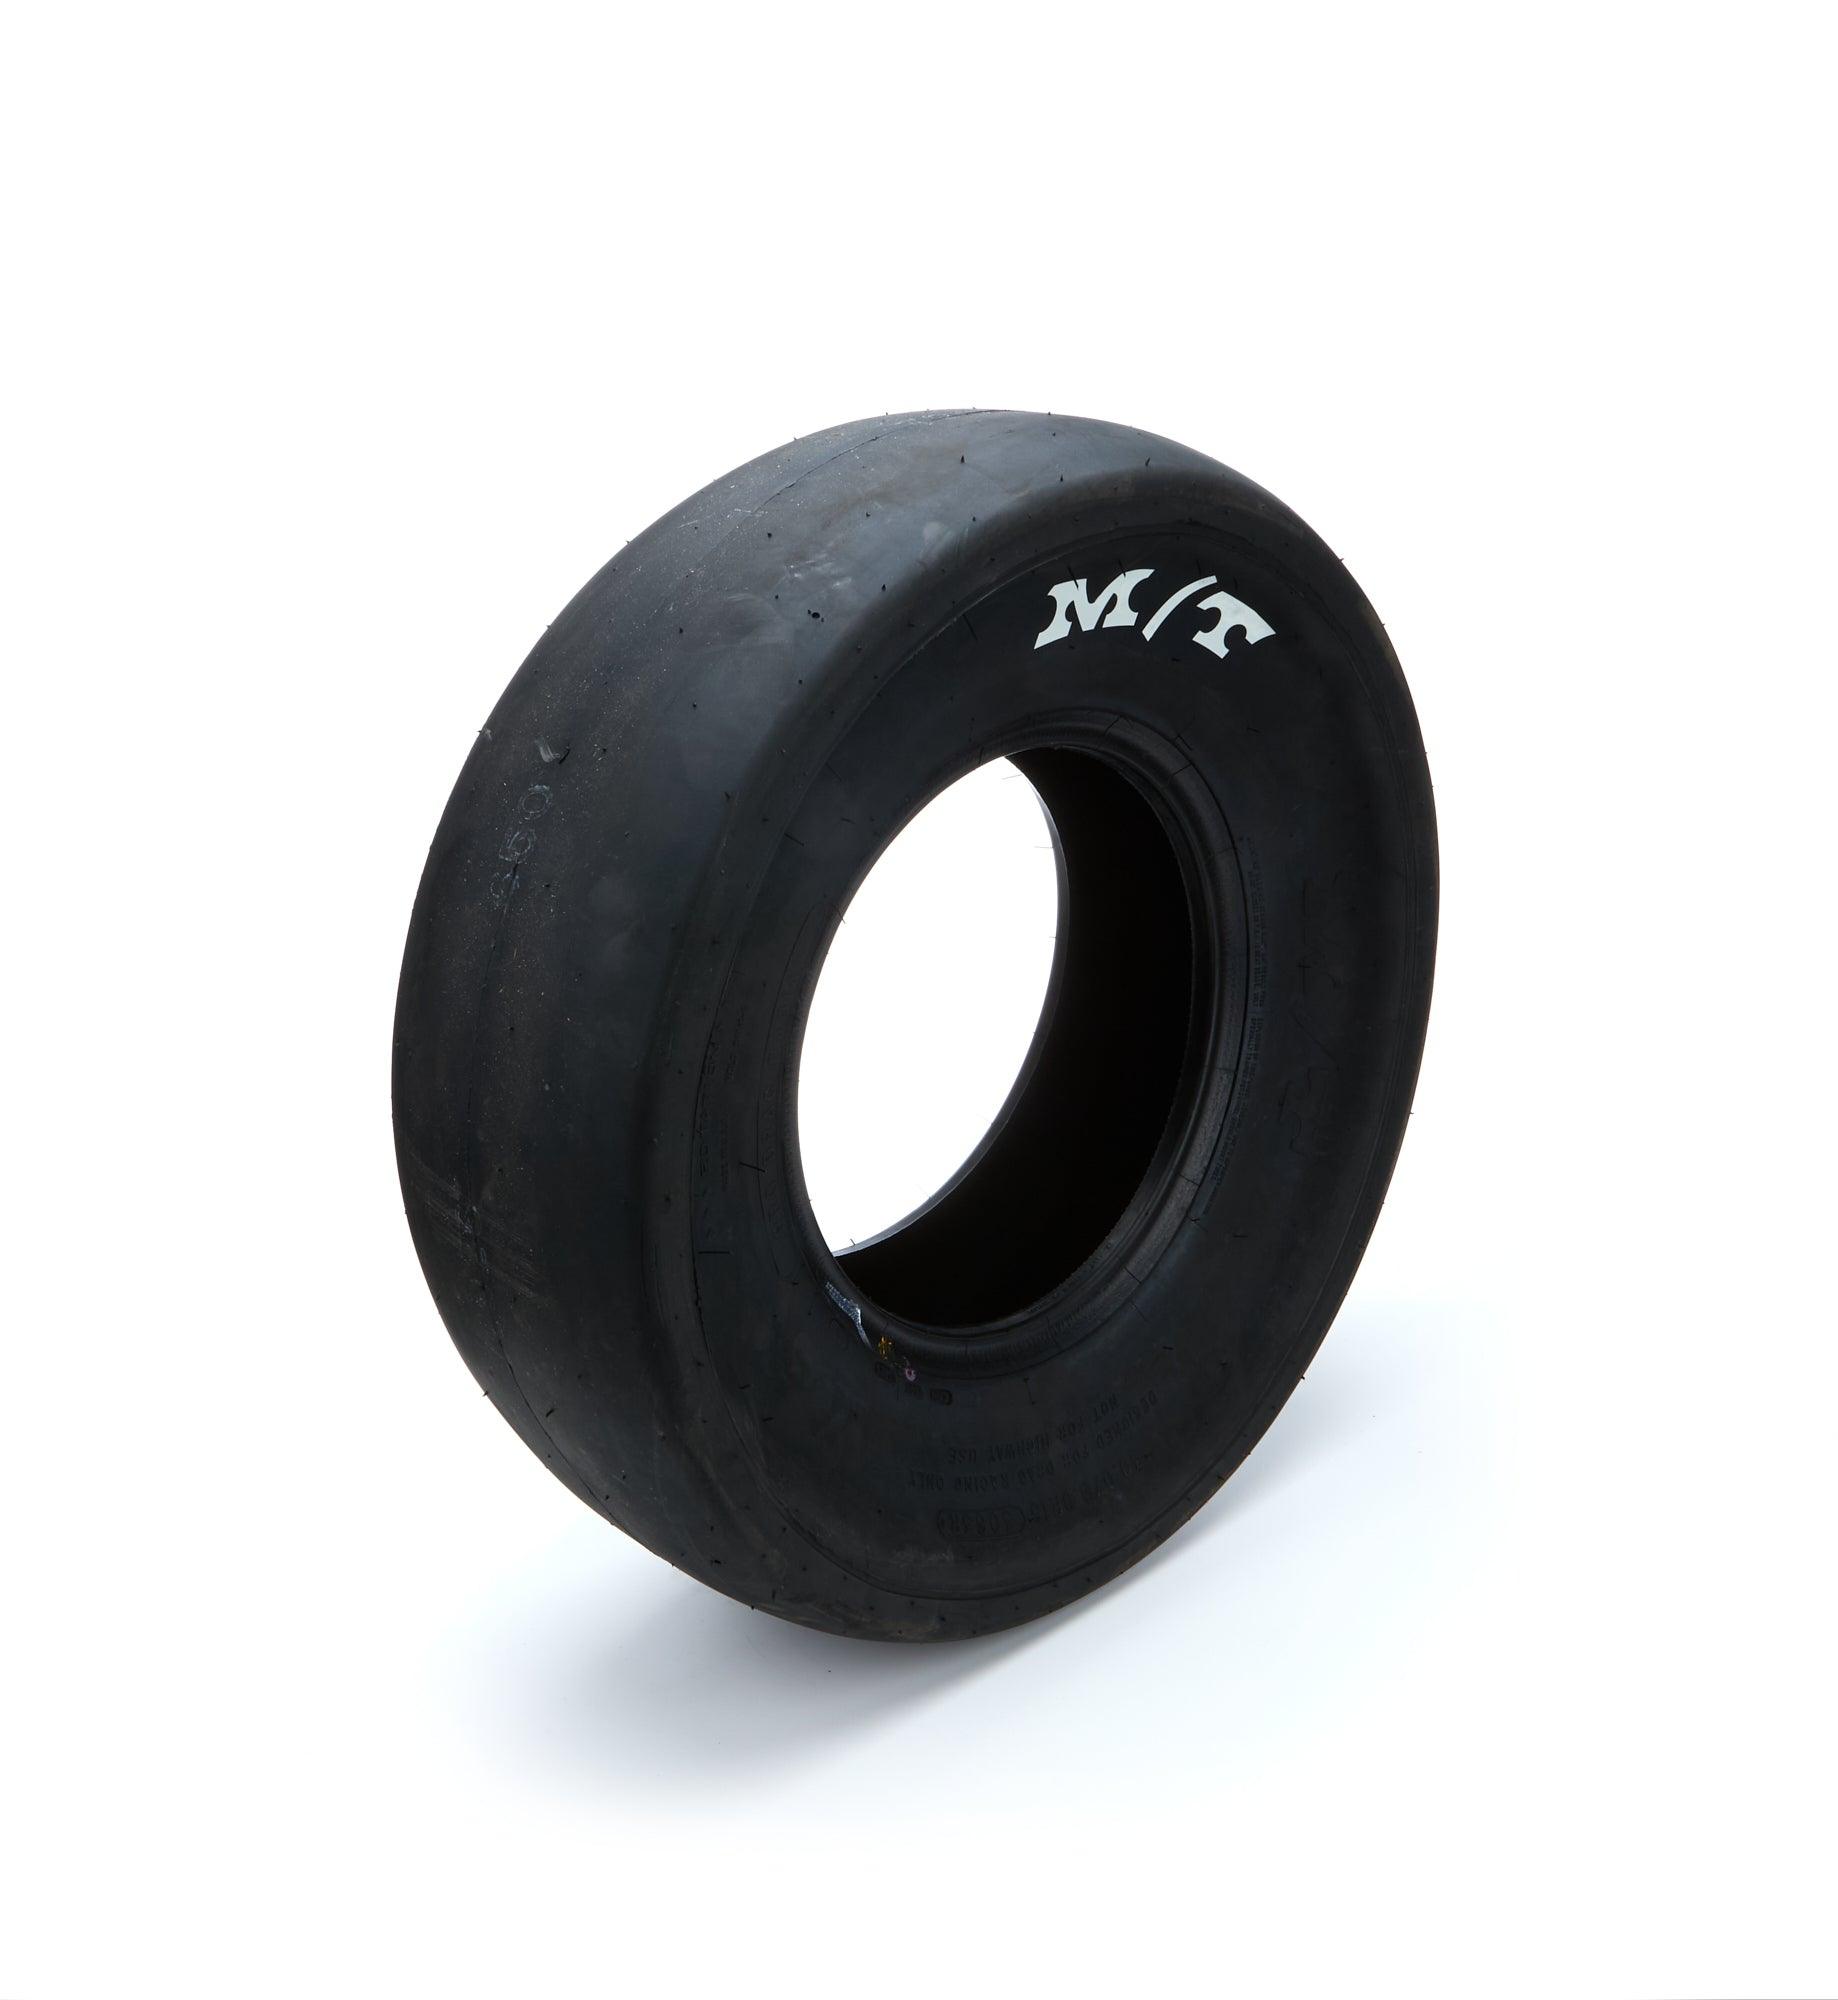 30.0x9.0R15 Pro Drag Radial Tire - Burlile Performance Products